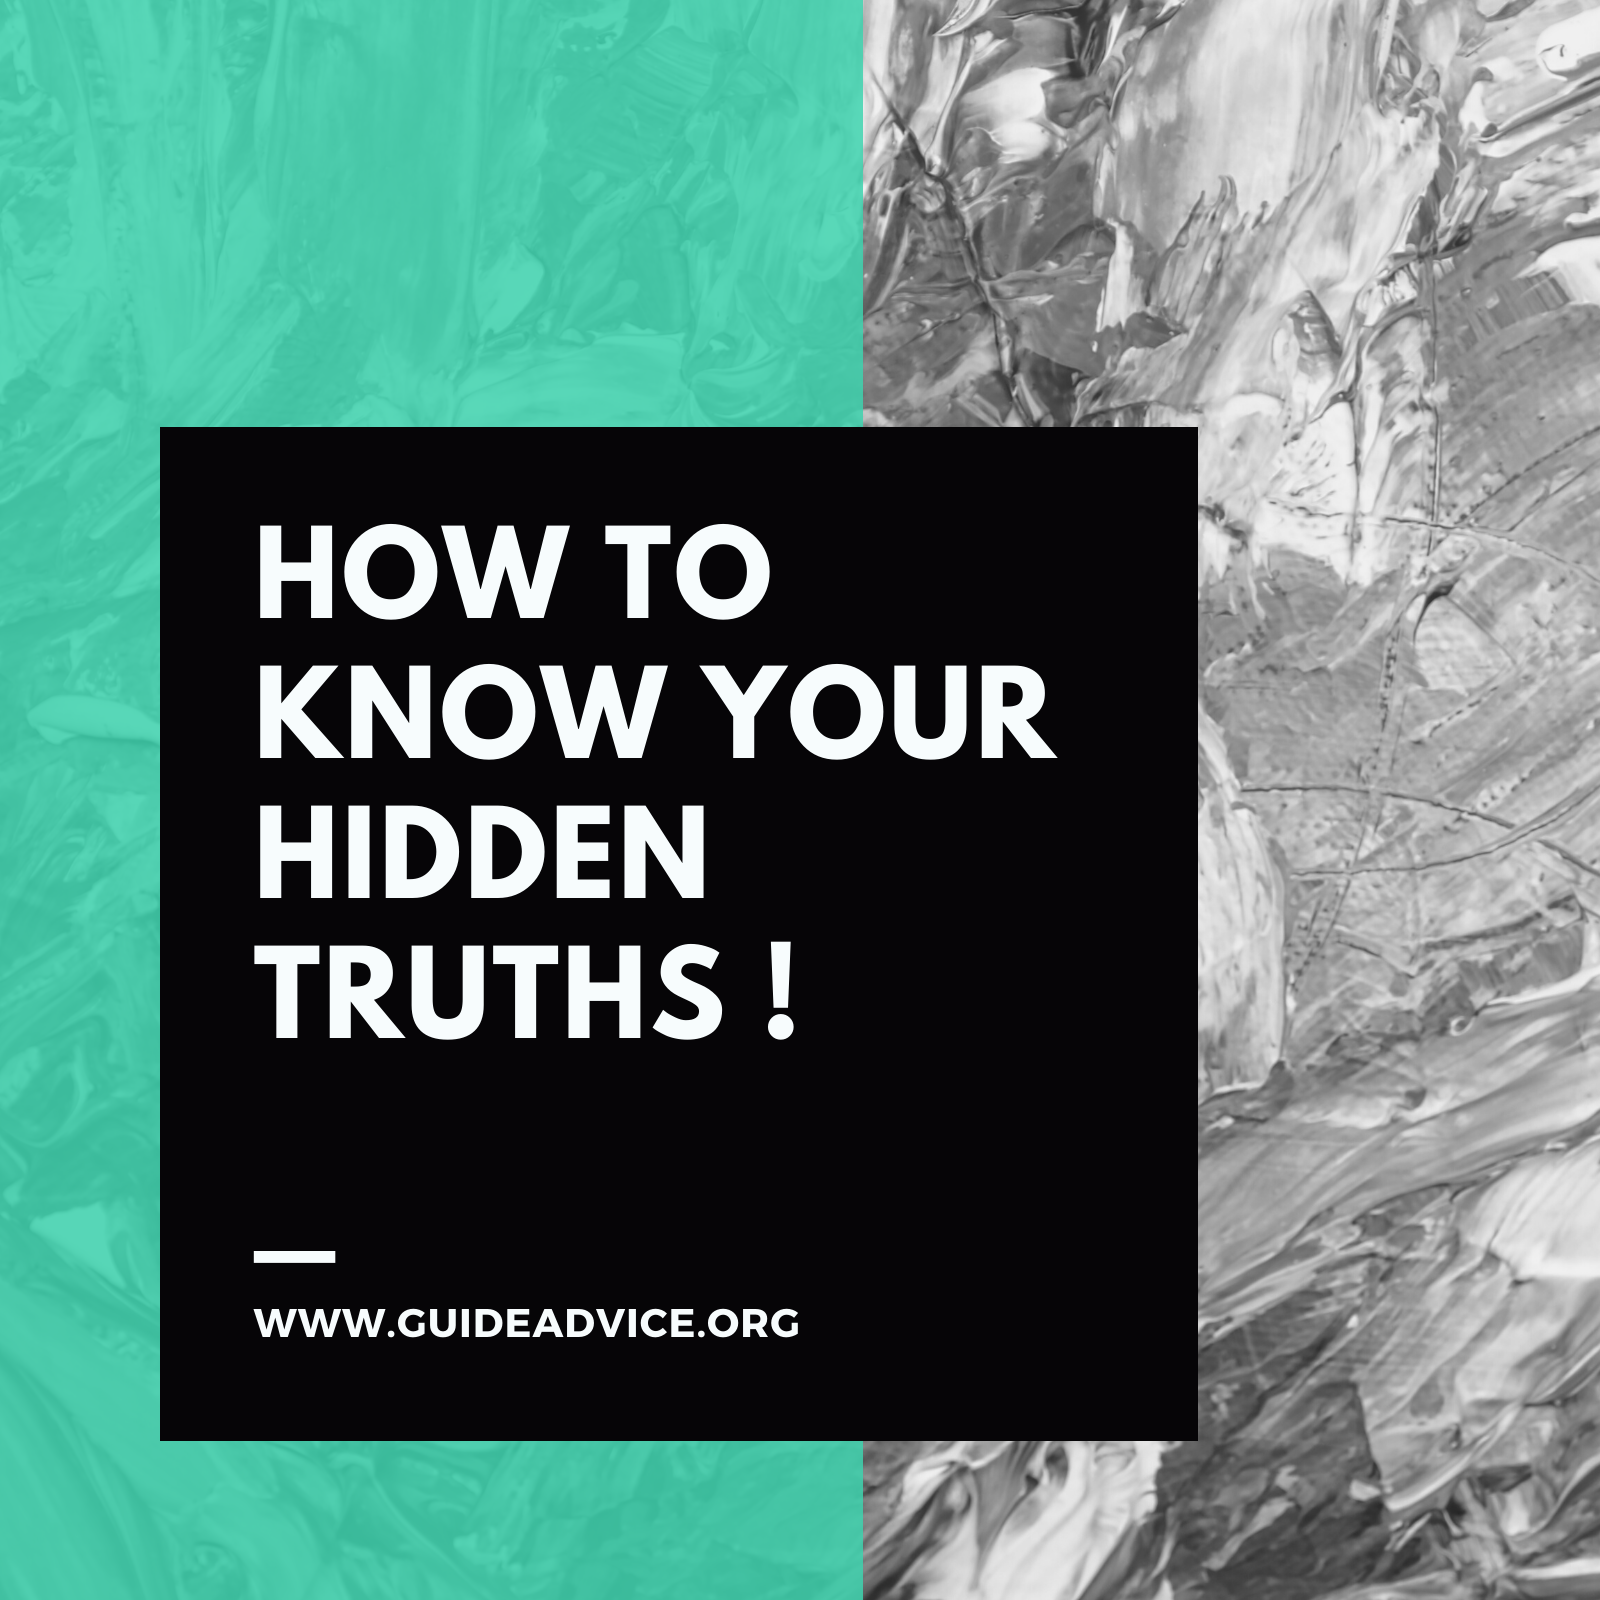 How to Know your Hidden Truths